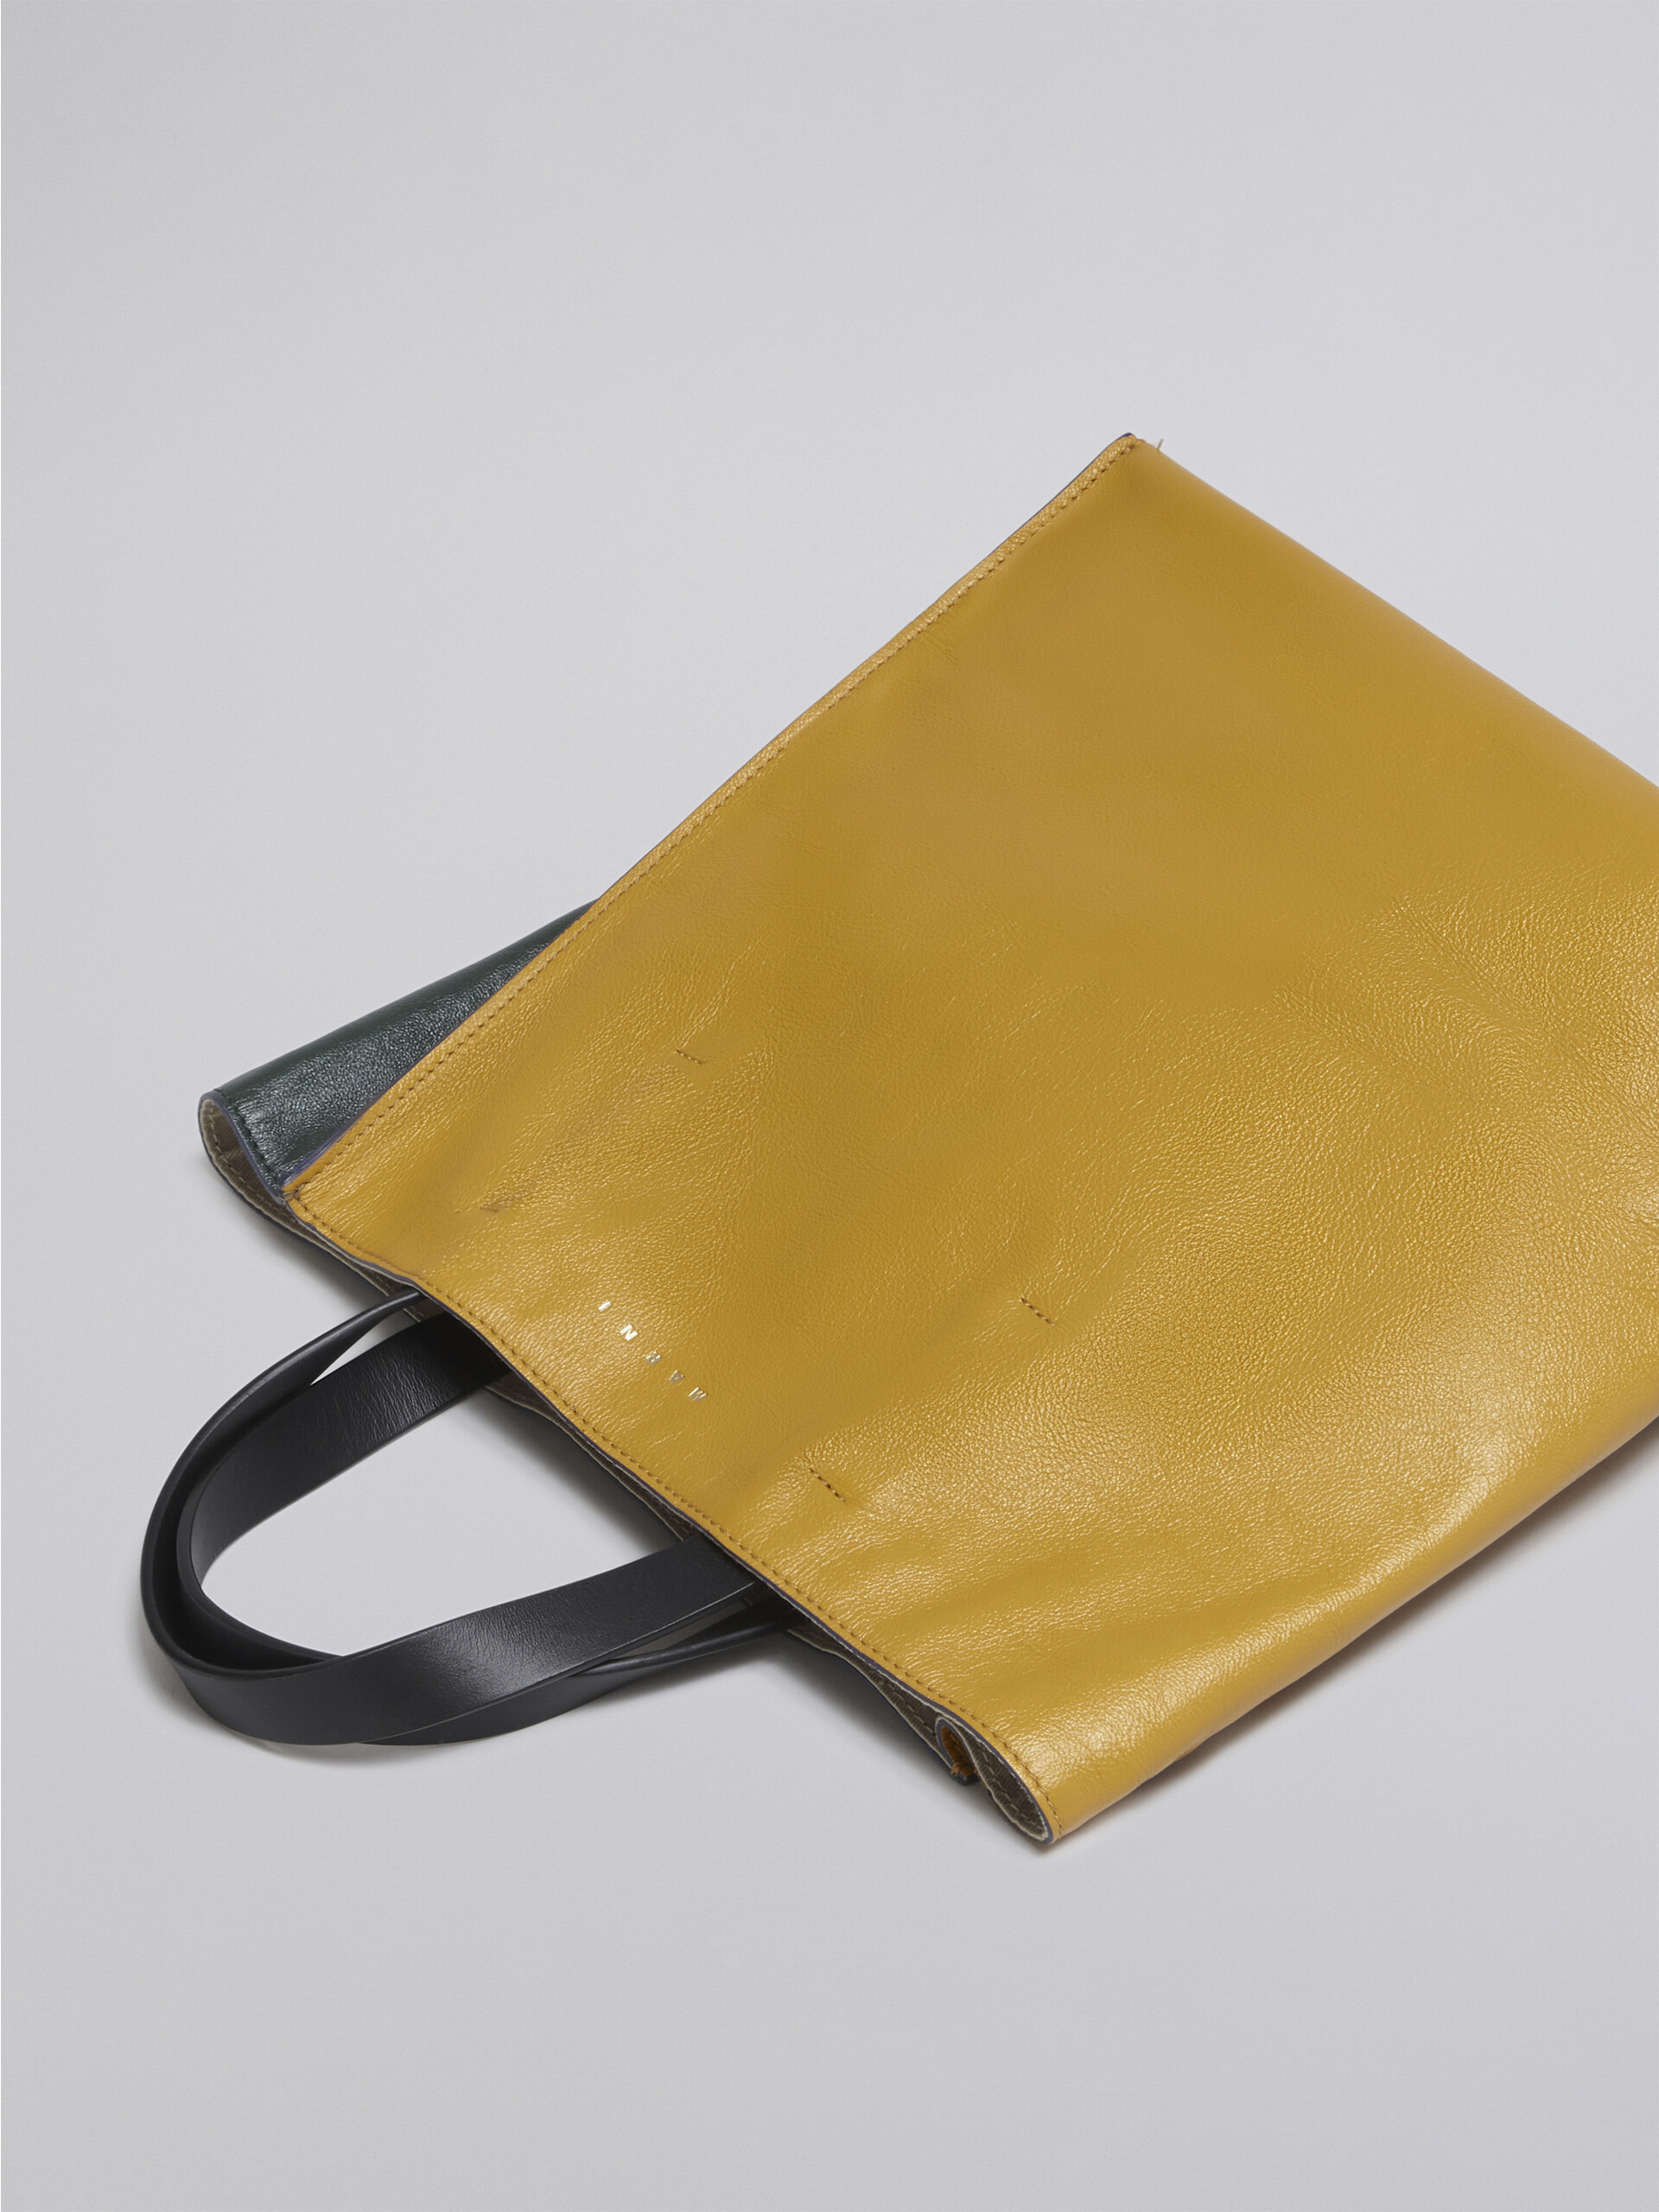 MUSEO SOFT small bag in yellow and green leather - Shopping Bags - Image 5